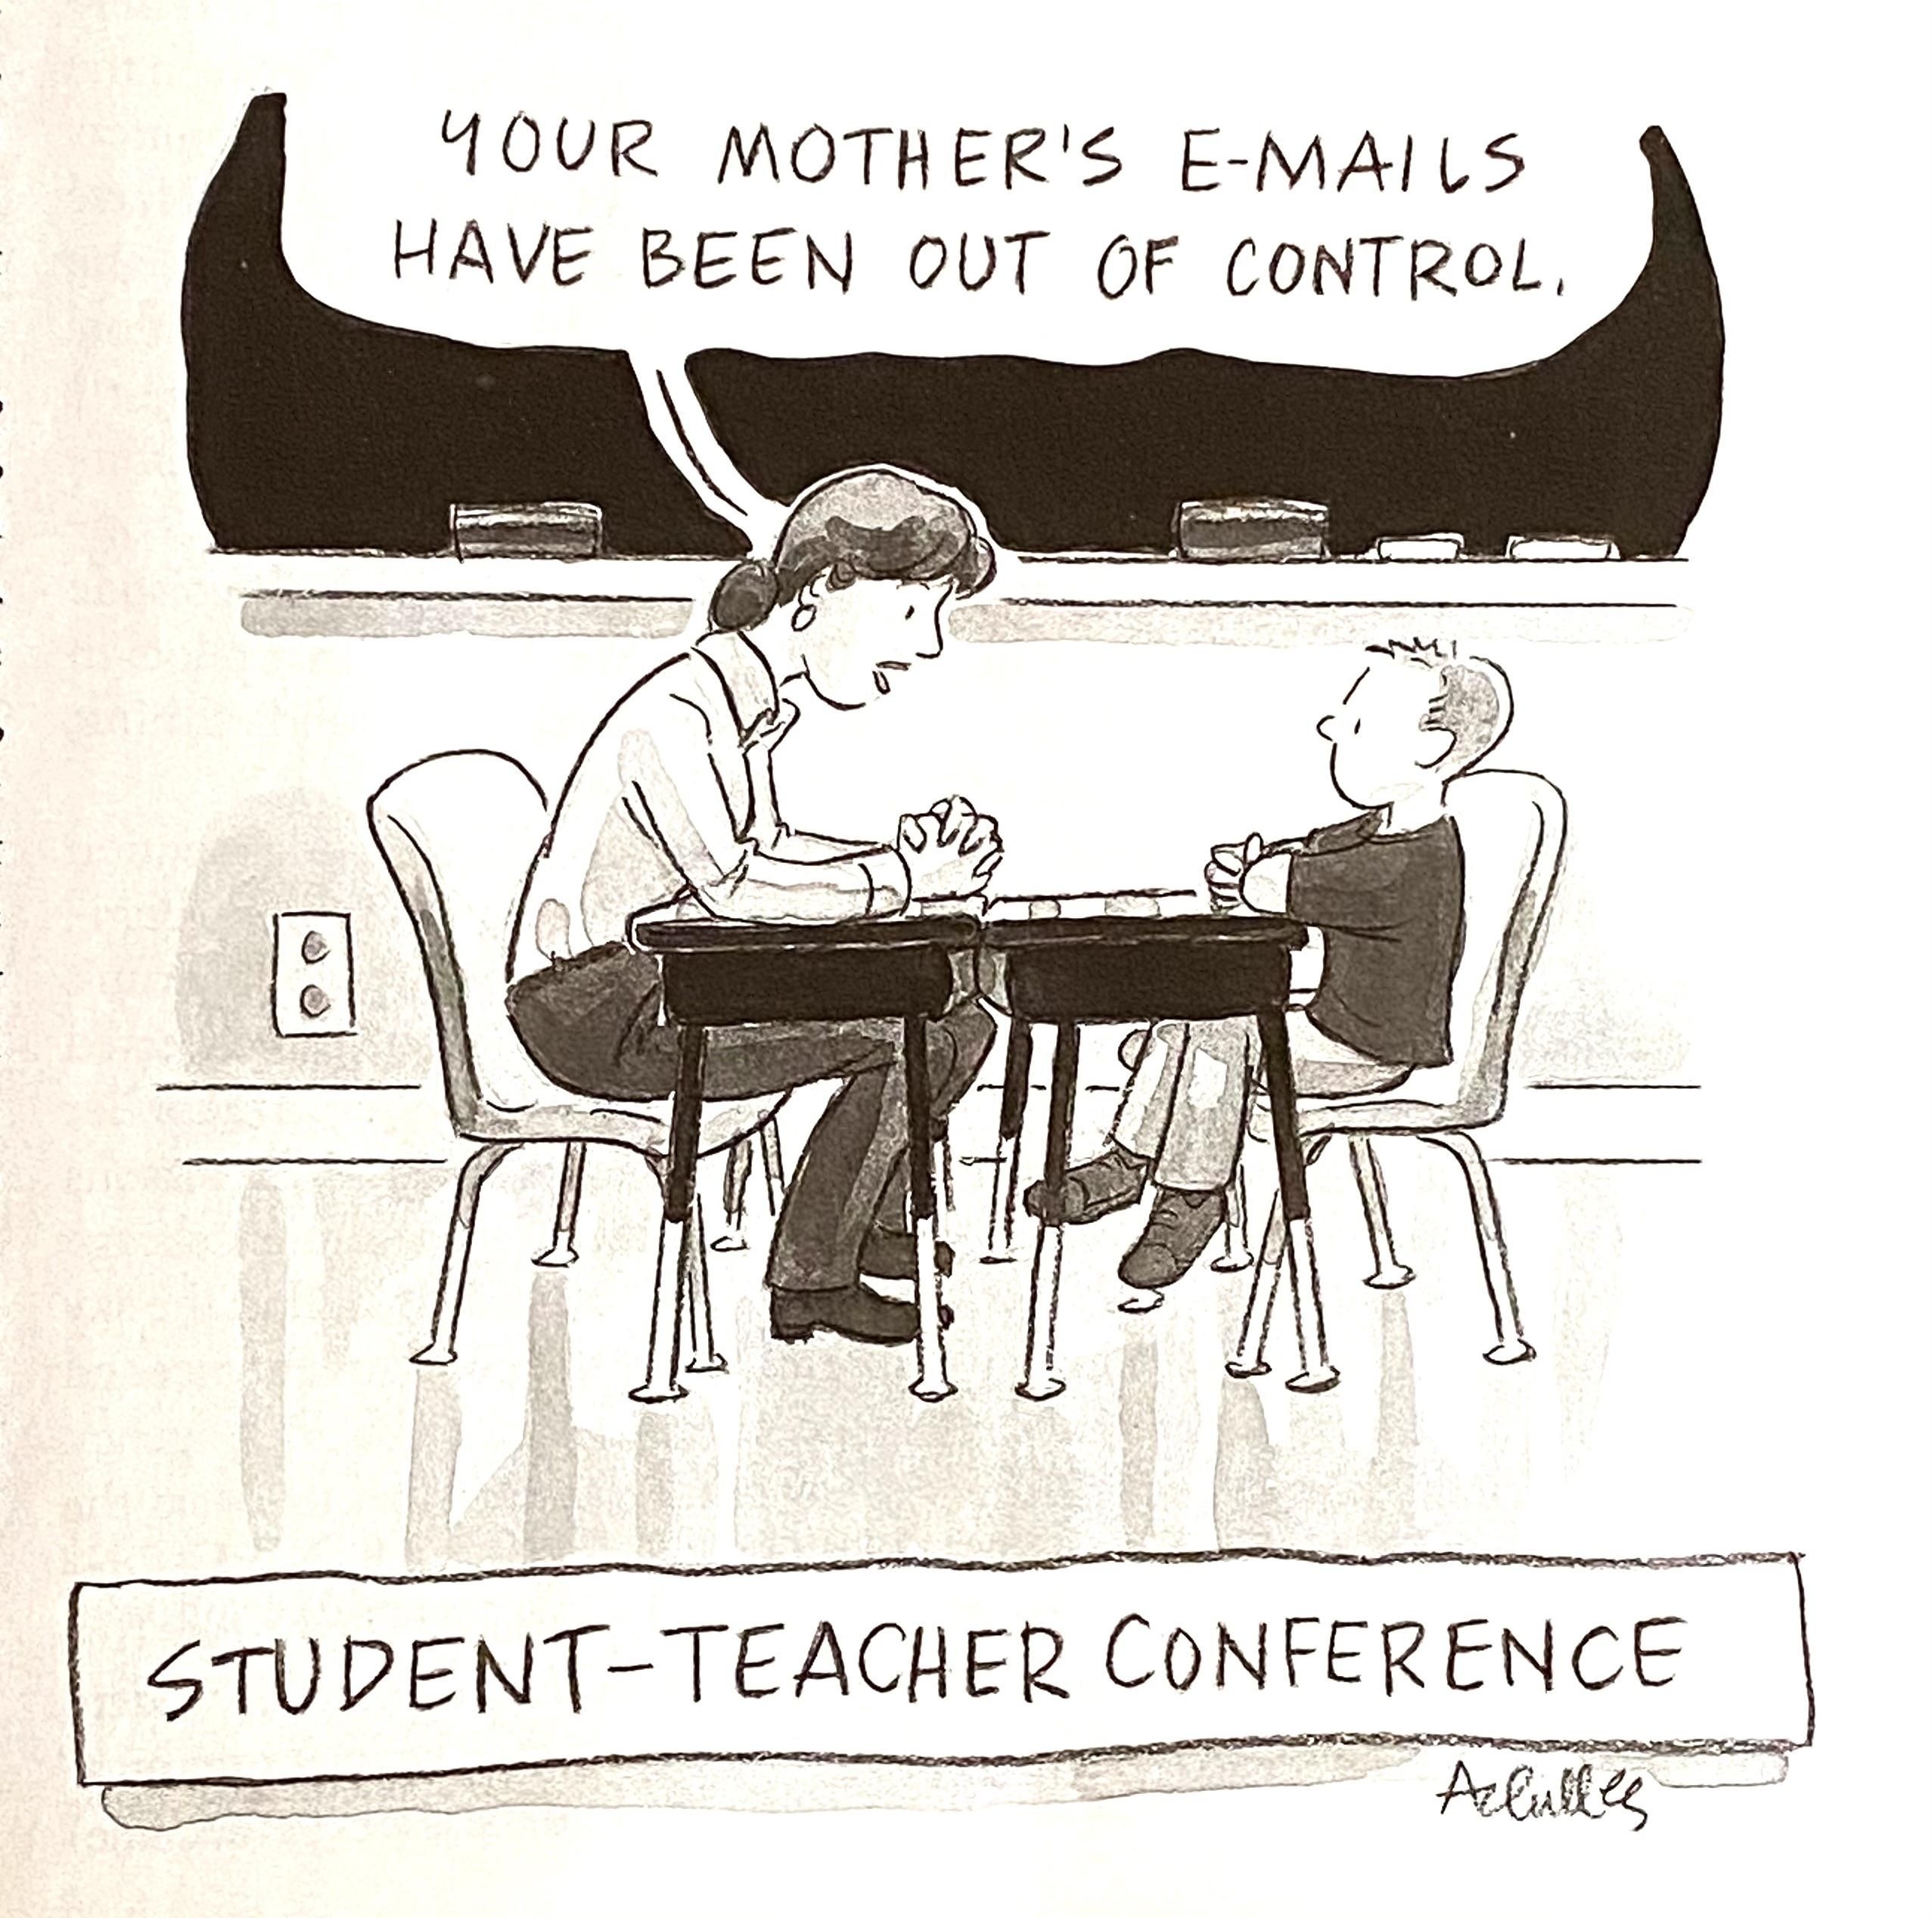 Student-teacher conference